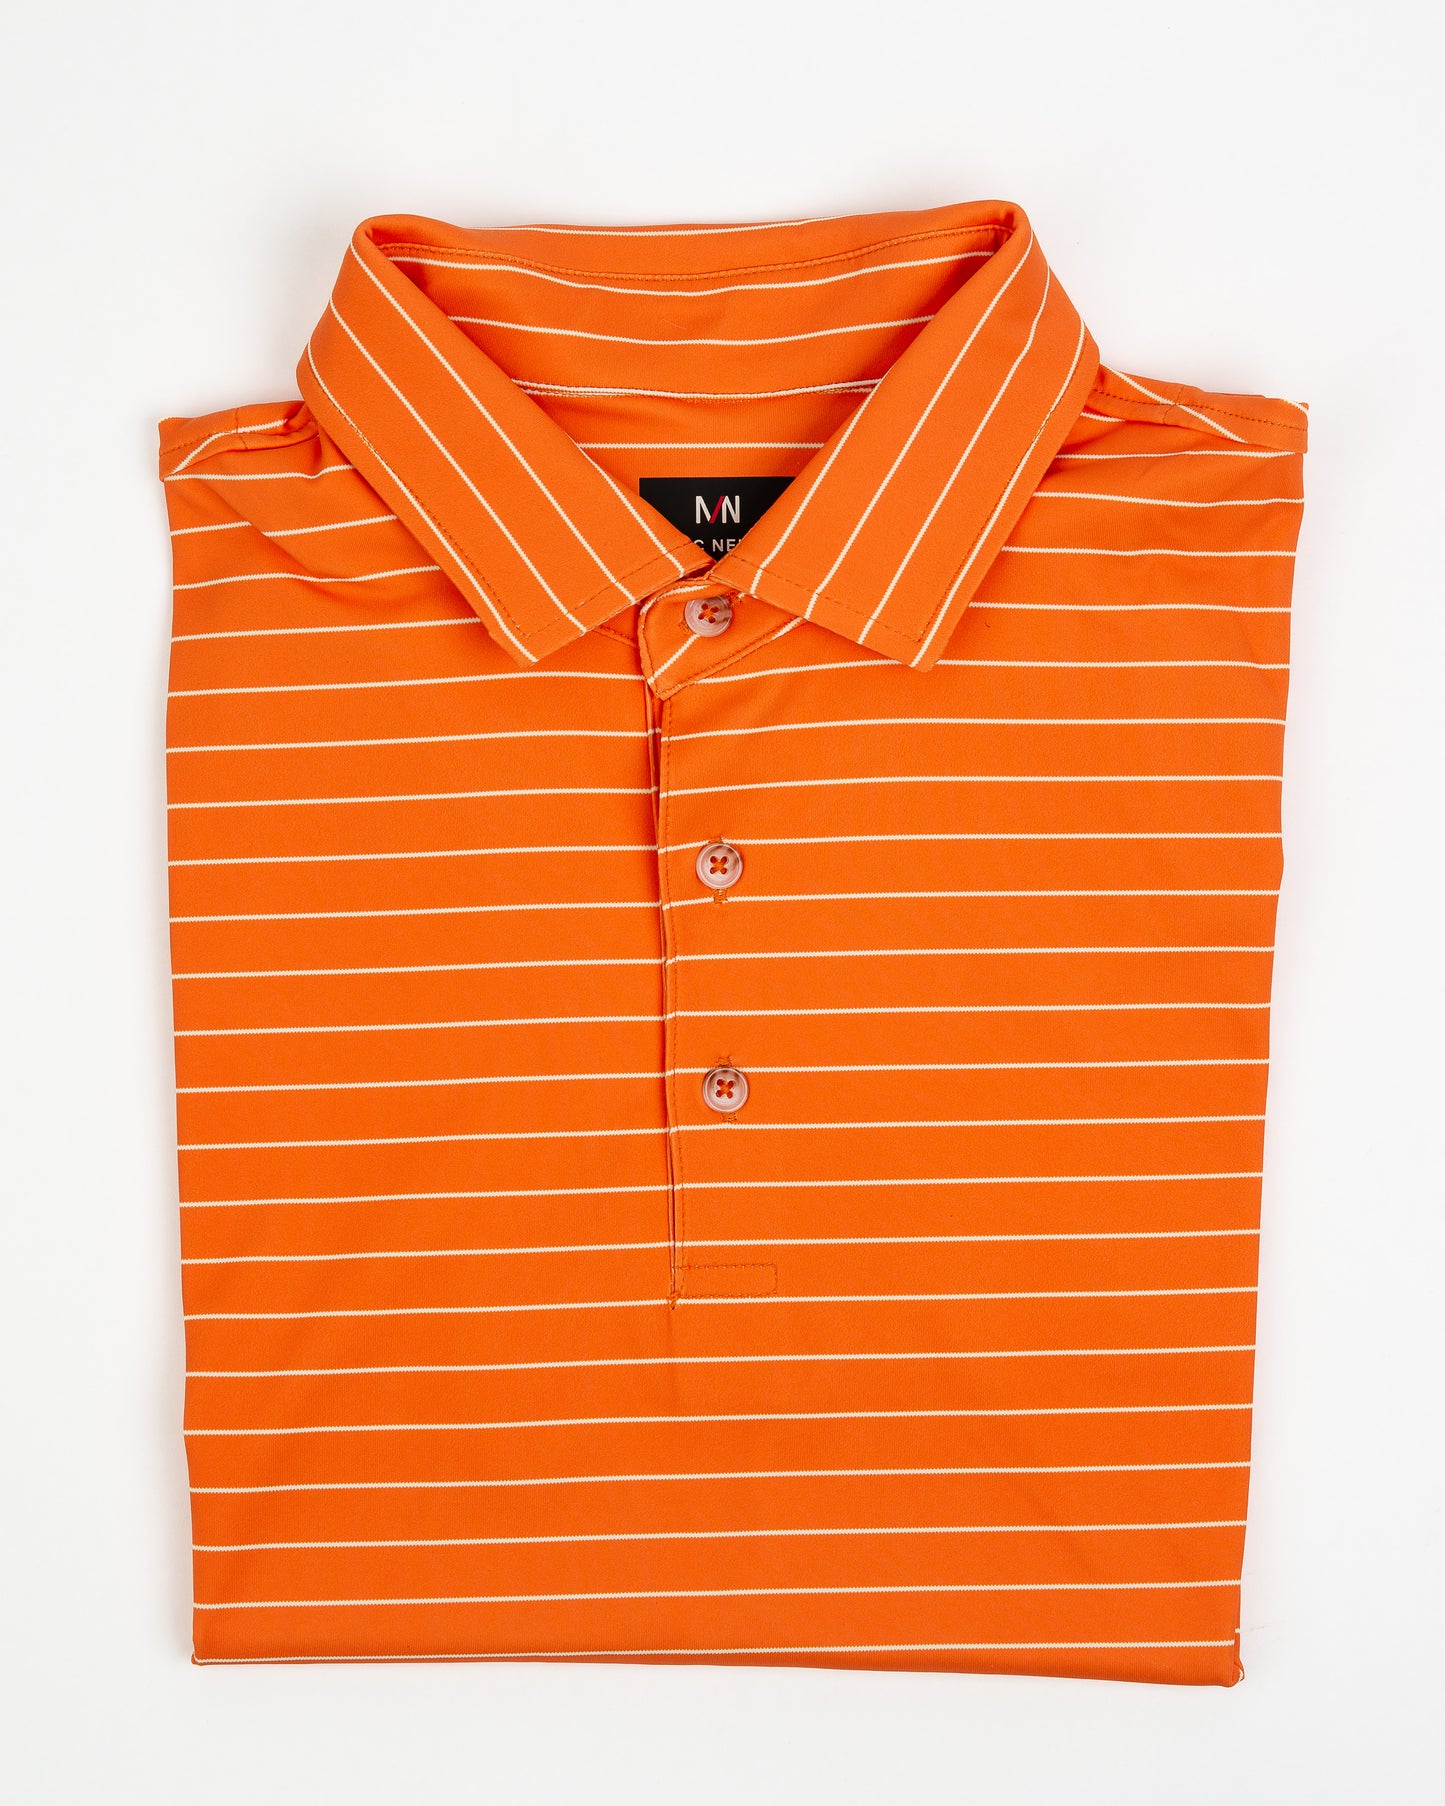 Tennessee orange and white striped men's golf polo folded on a white background.